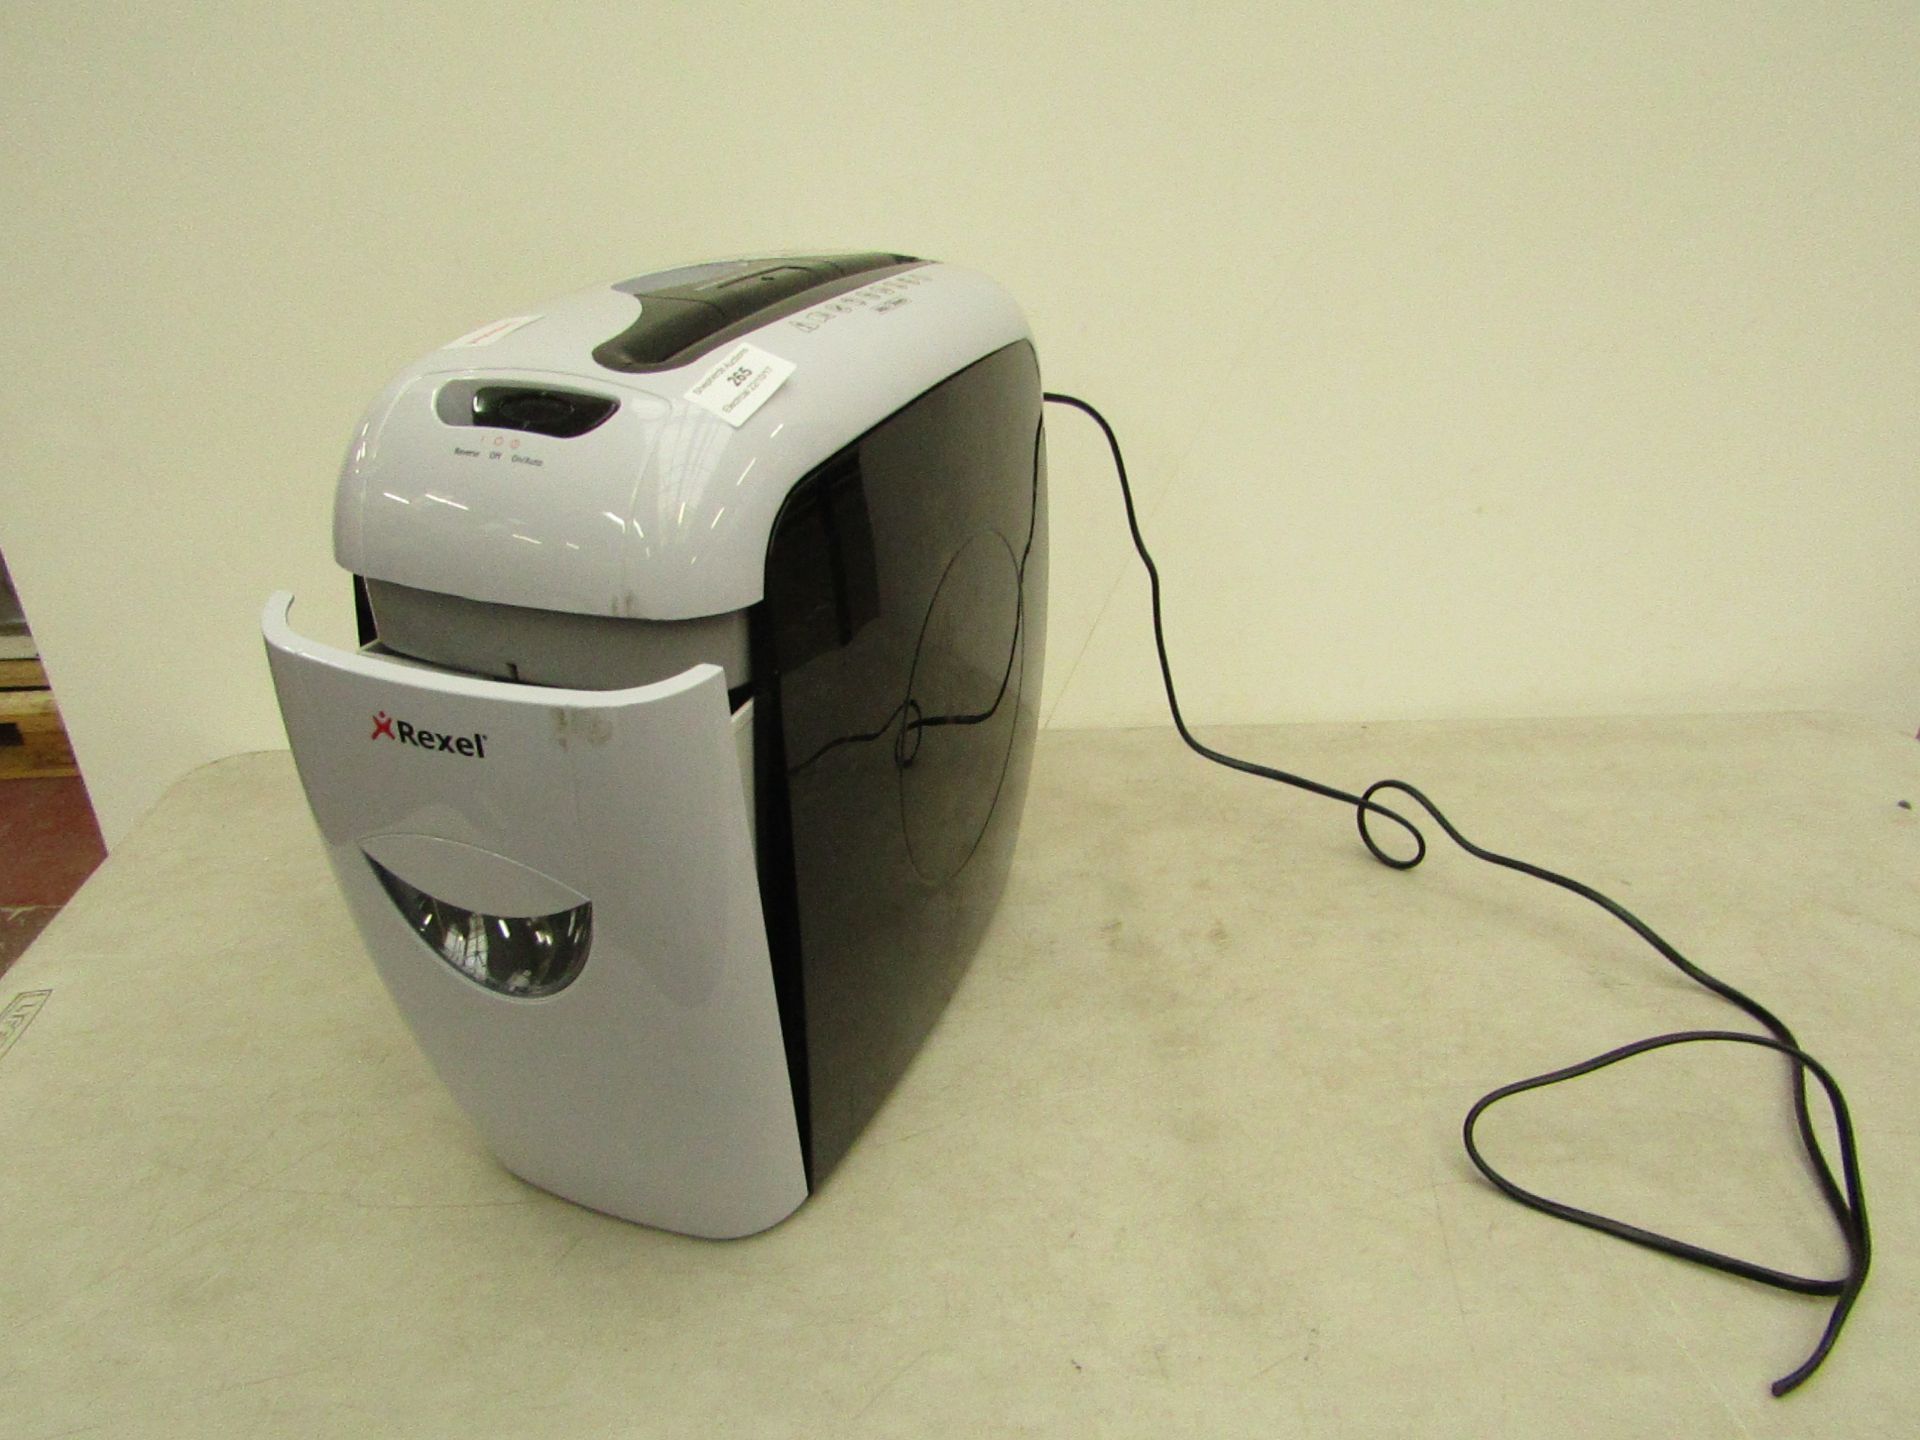 Rexel paper shredder, untested due to no plug.